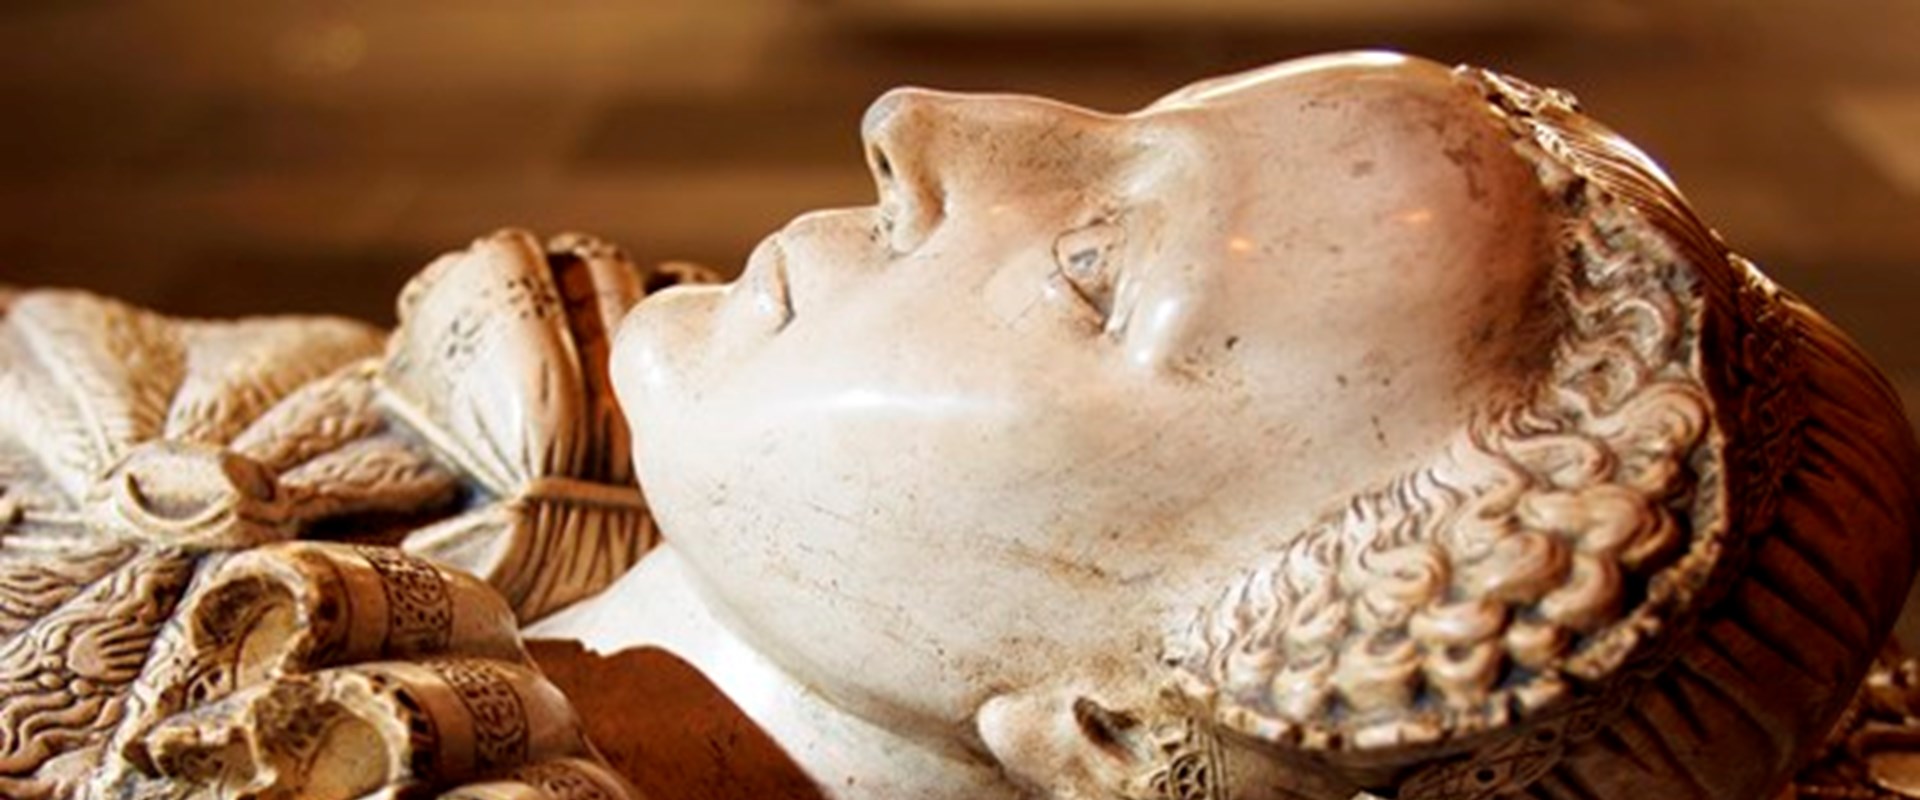 Closeup of a white stone tomb carved to depict Mary, Queen of Scots lying down in full dress.